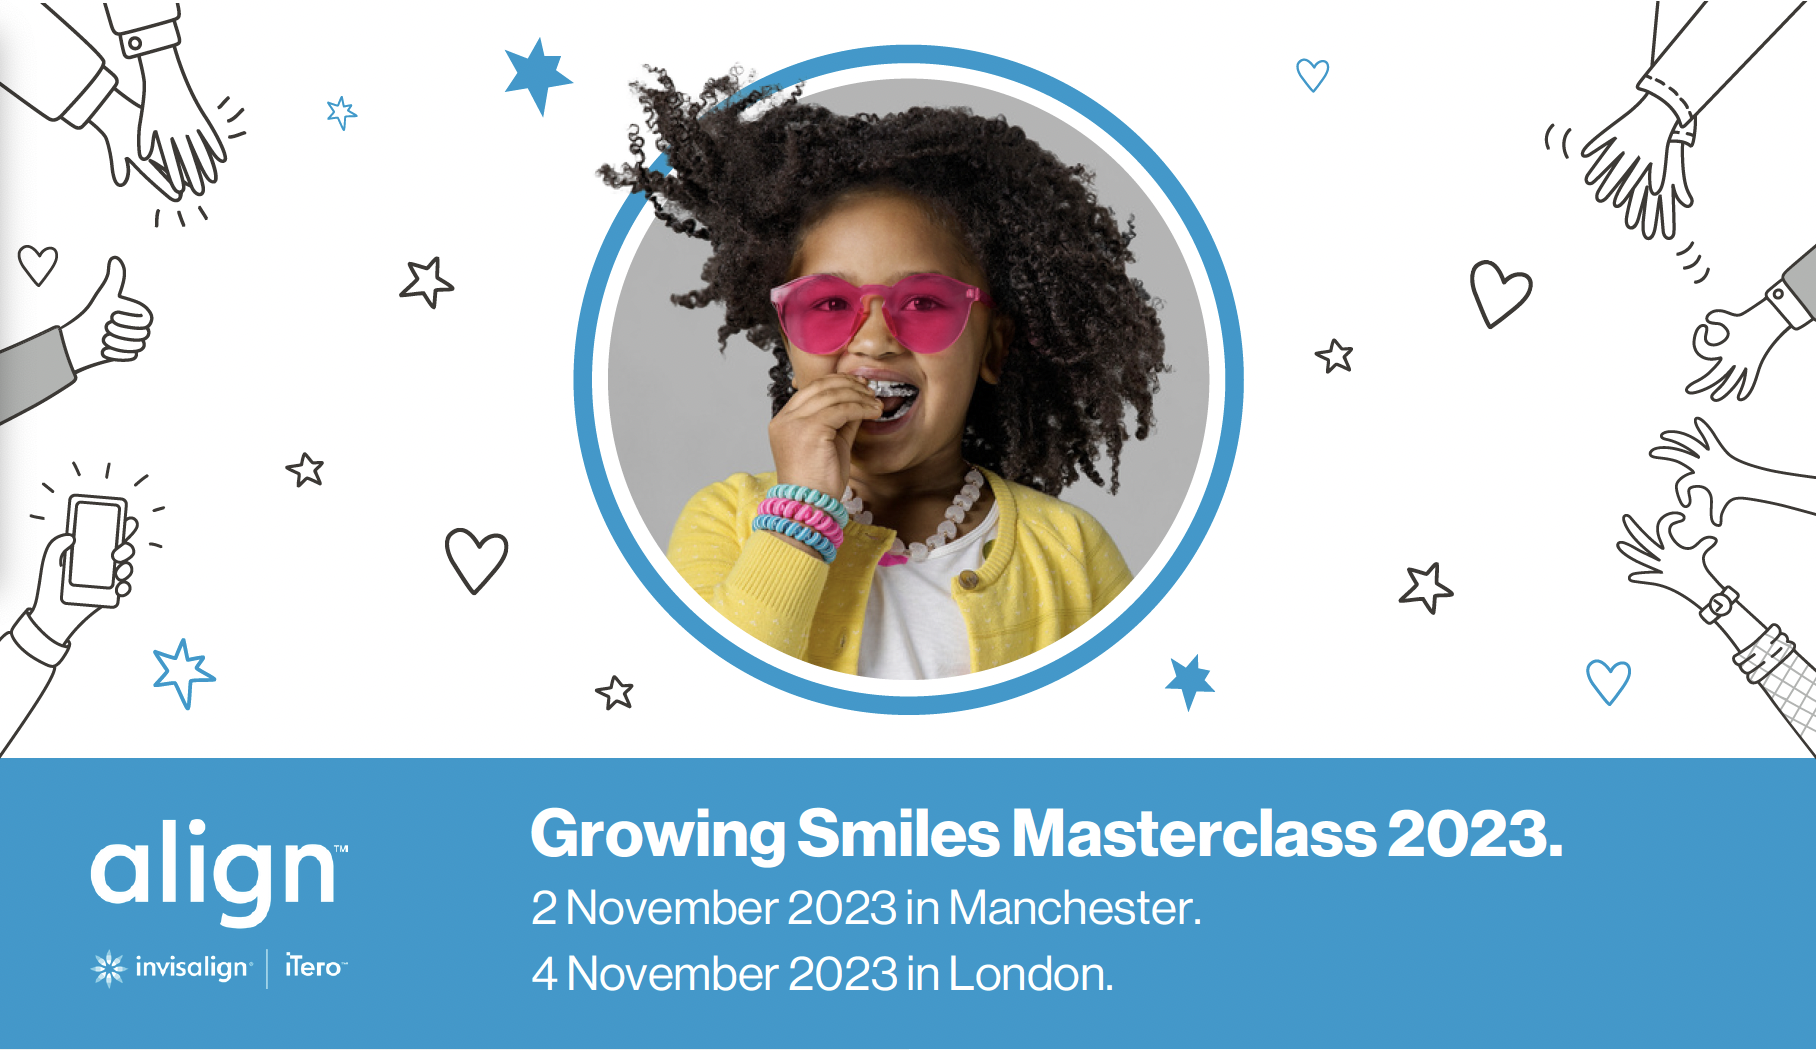 Learn more about how to optimise Invisalign treatment for children and teen patients at Align's Growing Smiles Masterclass 2023.